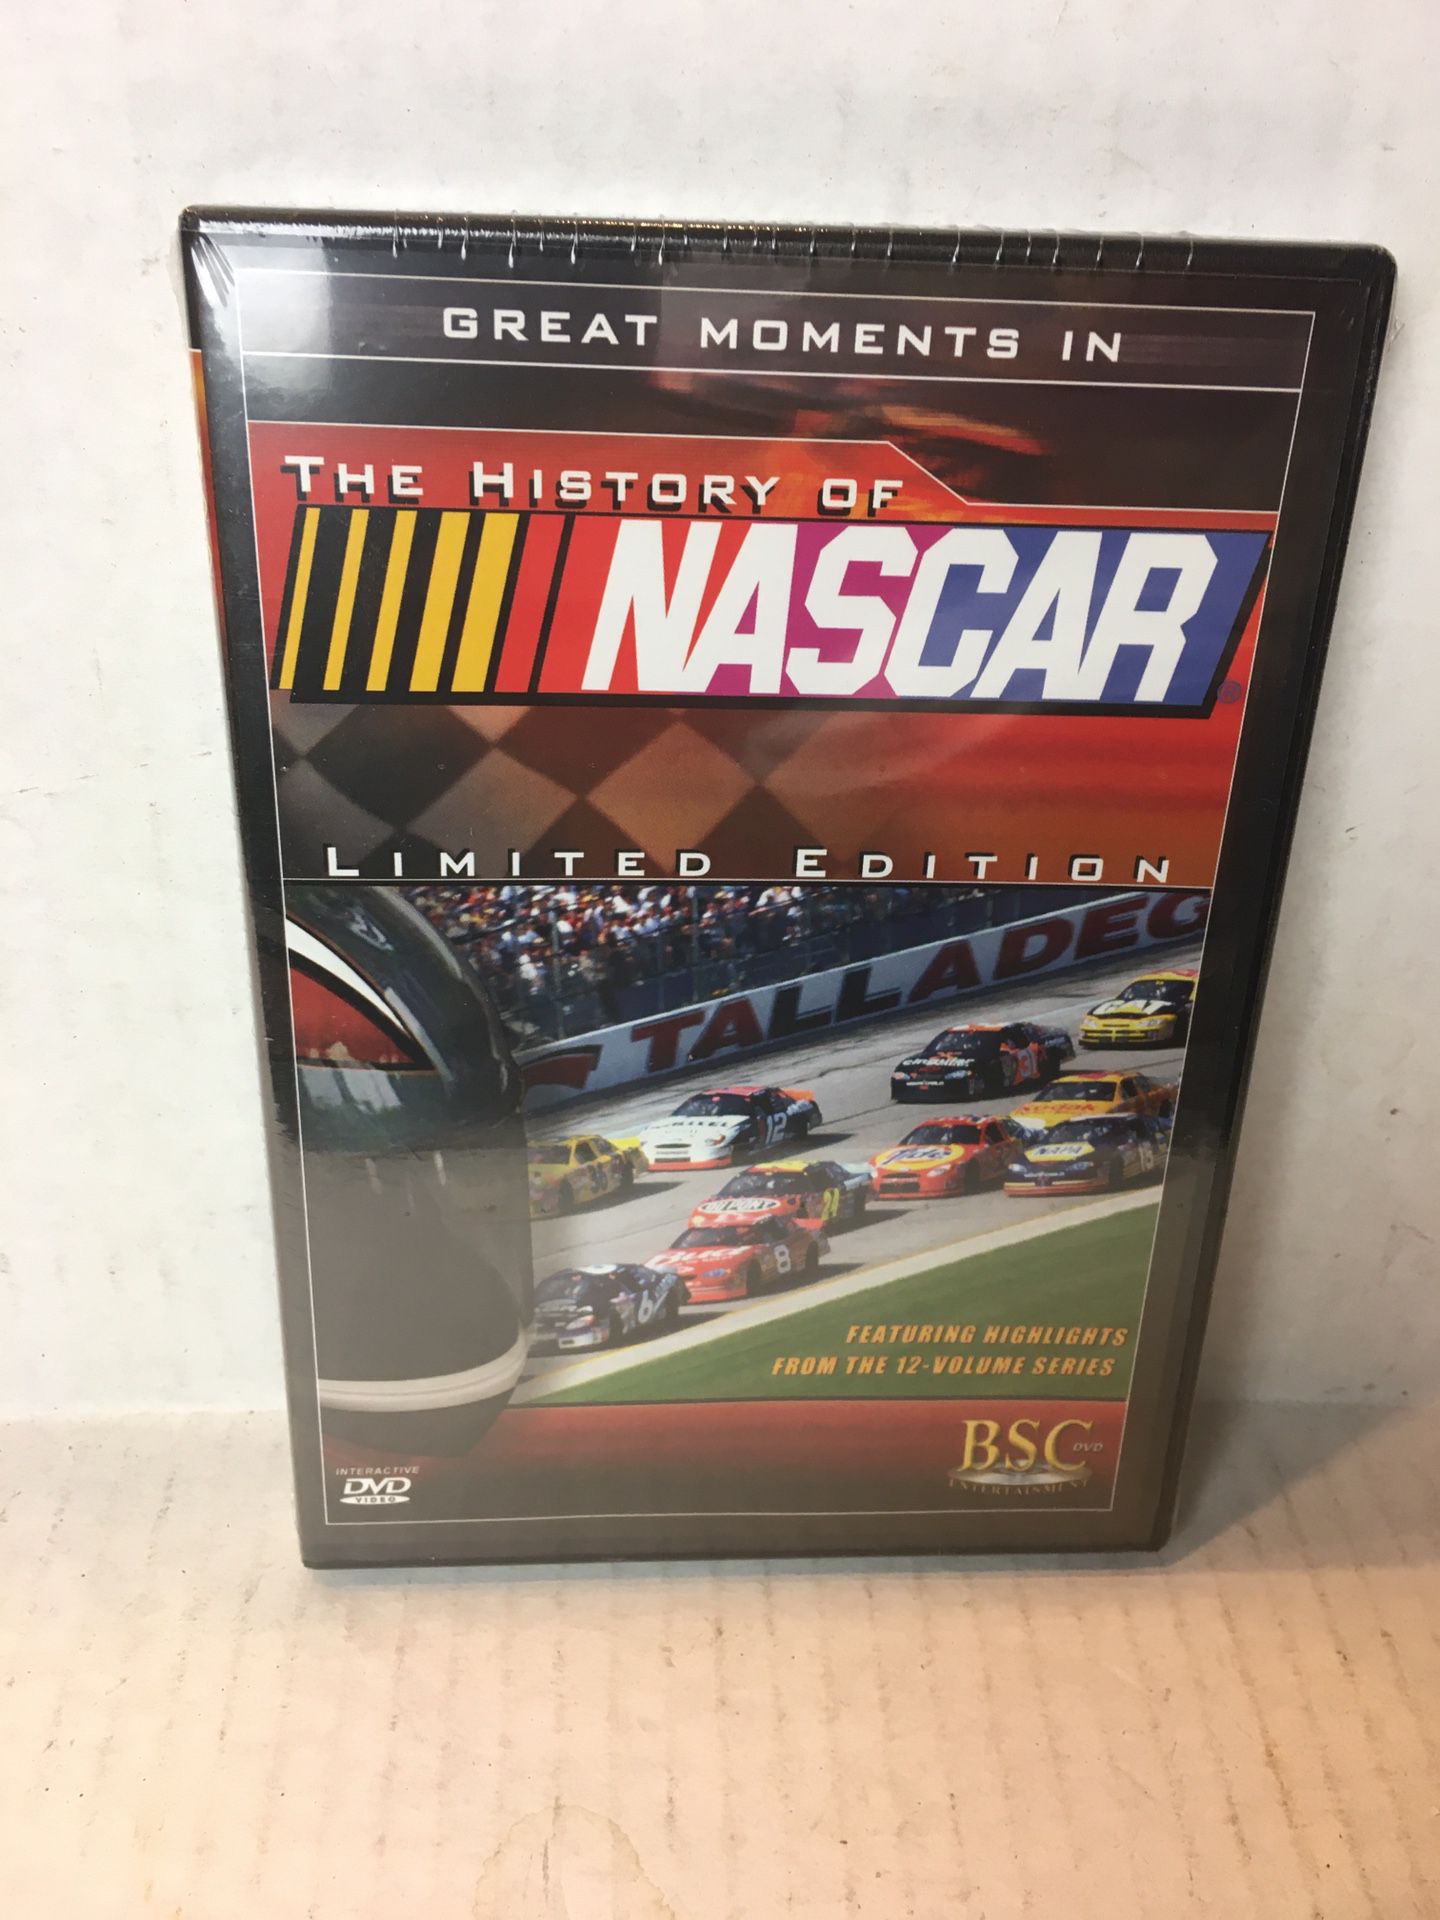 The History of NASCAR DVD. New in package